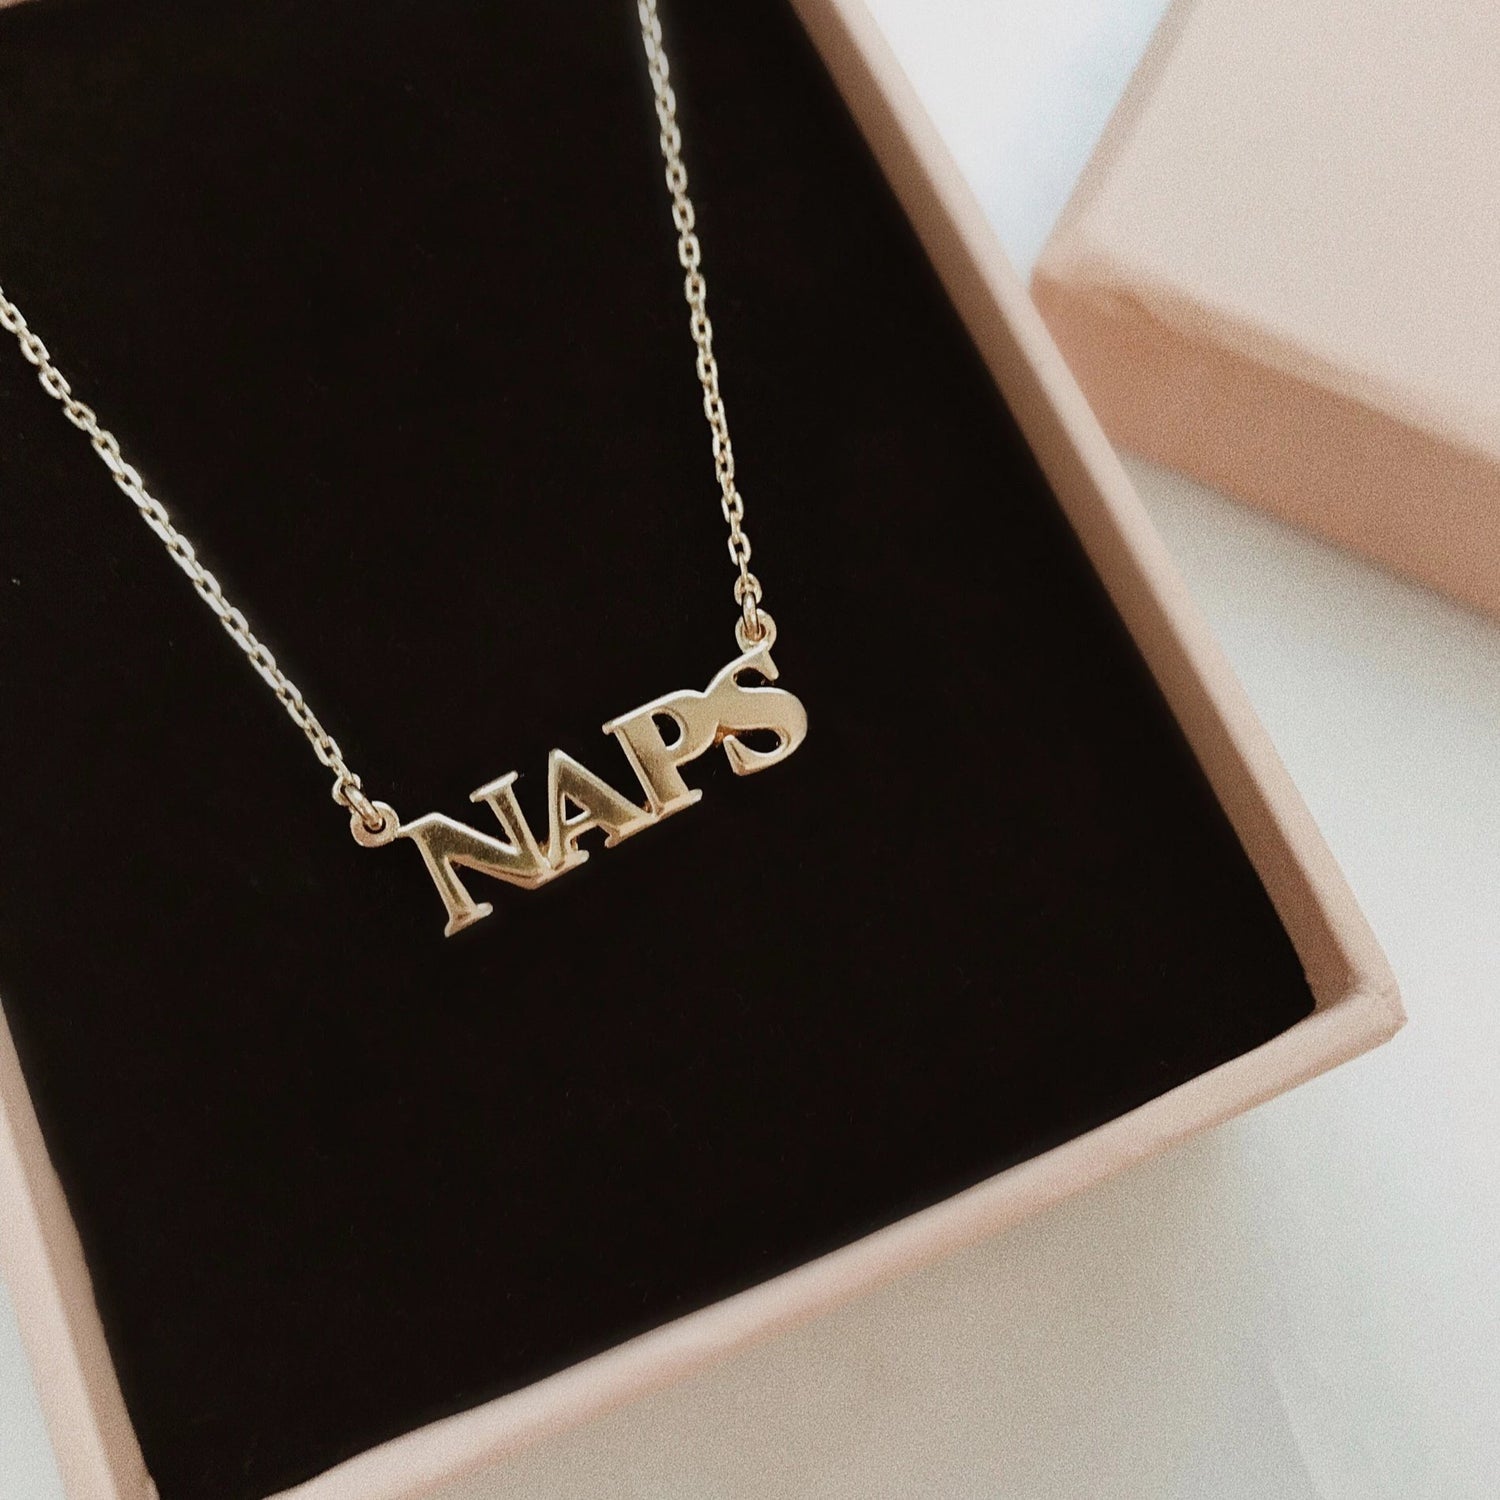 Naps Necklace - Bing Bang Jewelry NYC